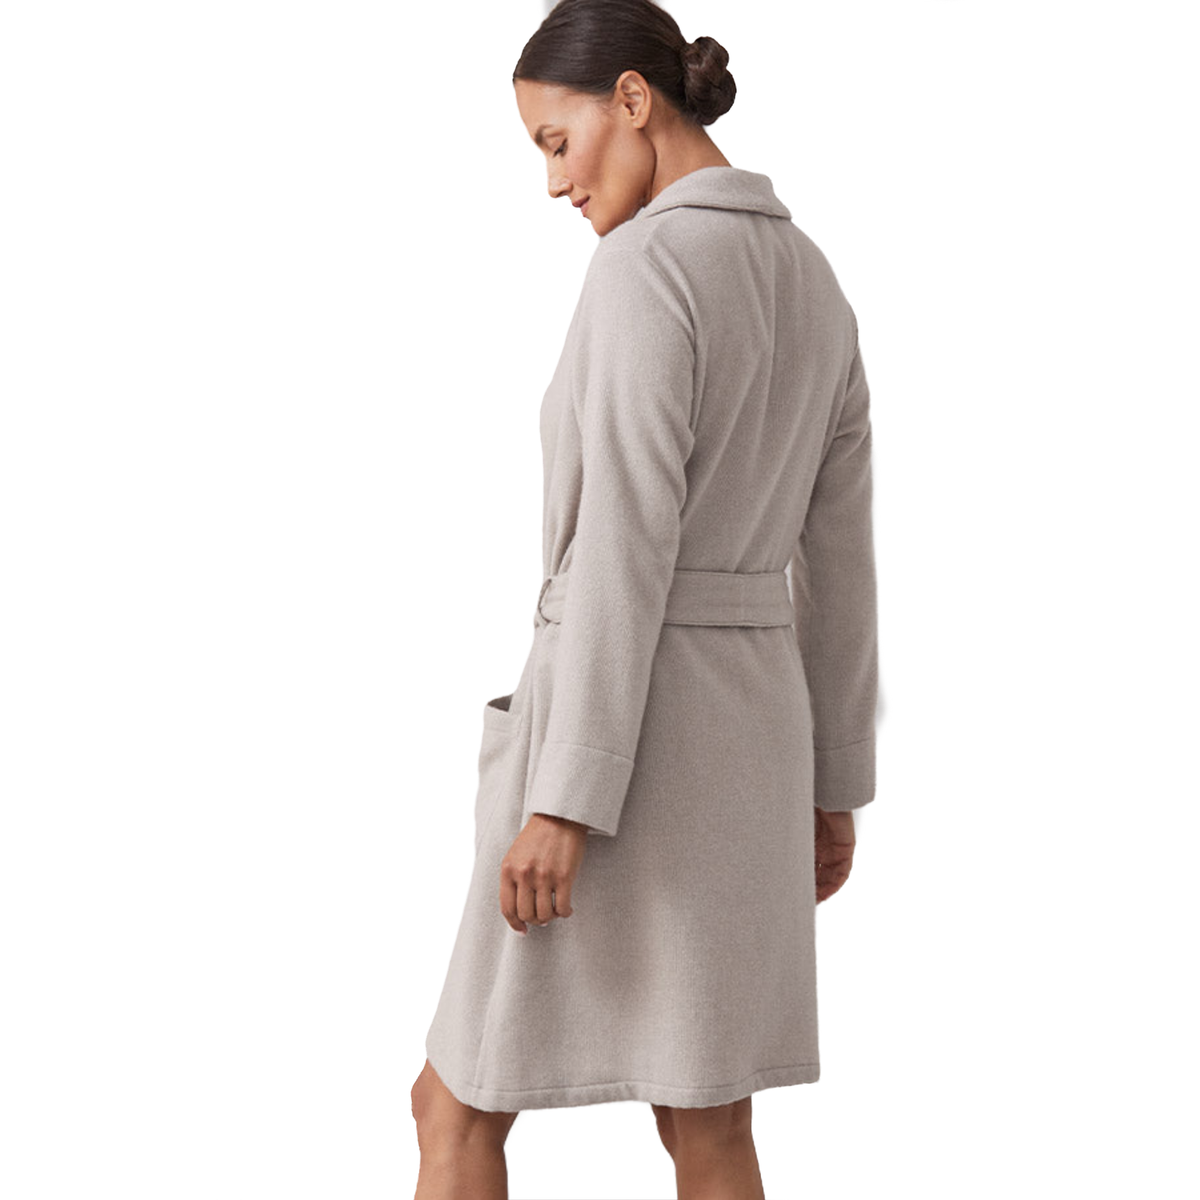 Rear View of Model Wearing of Sferra Sardinia’s Cashmere Robes in Grey Color